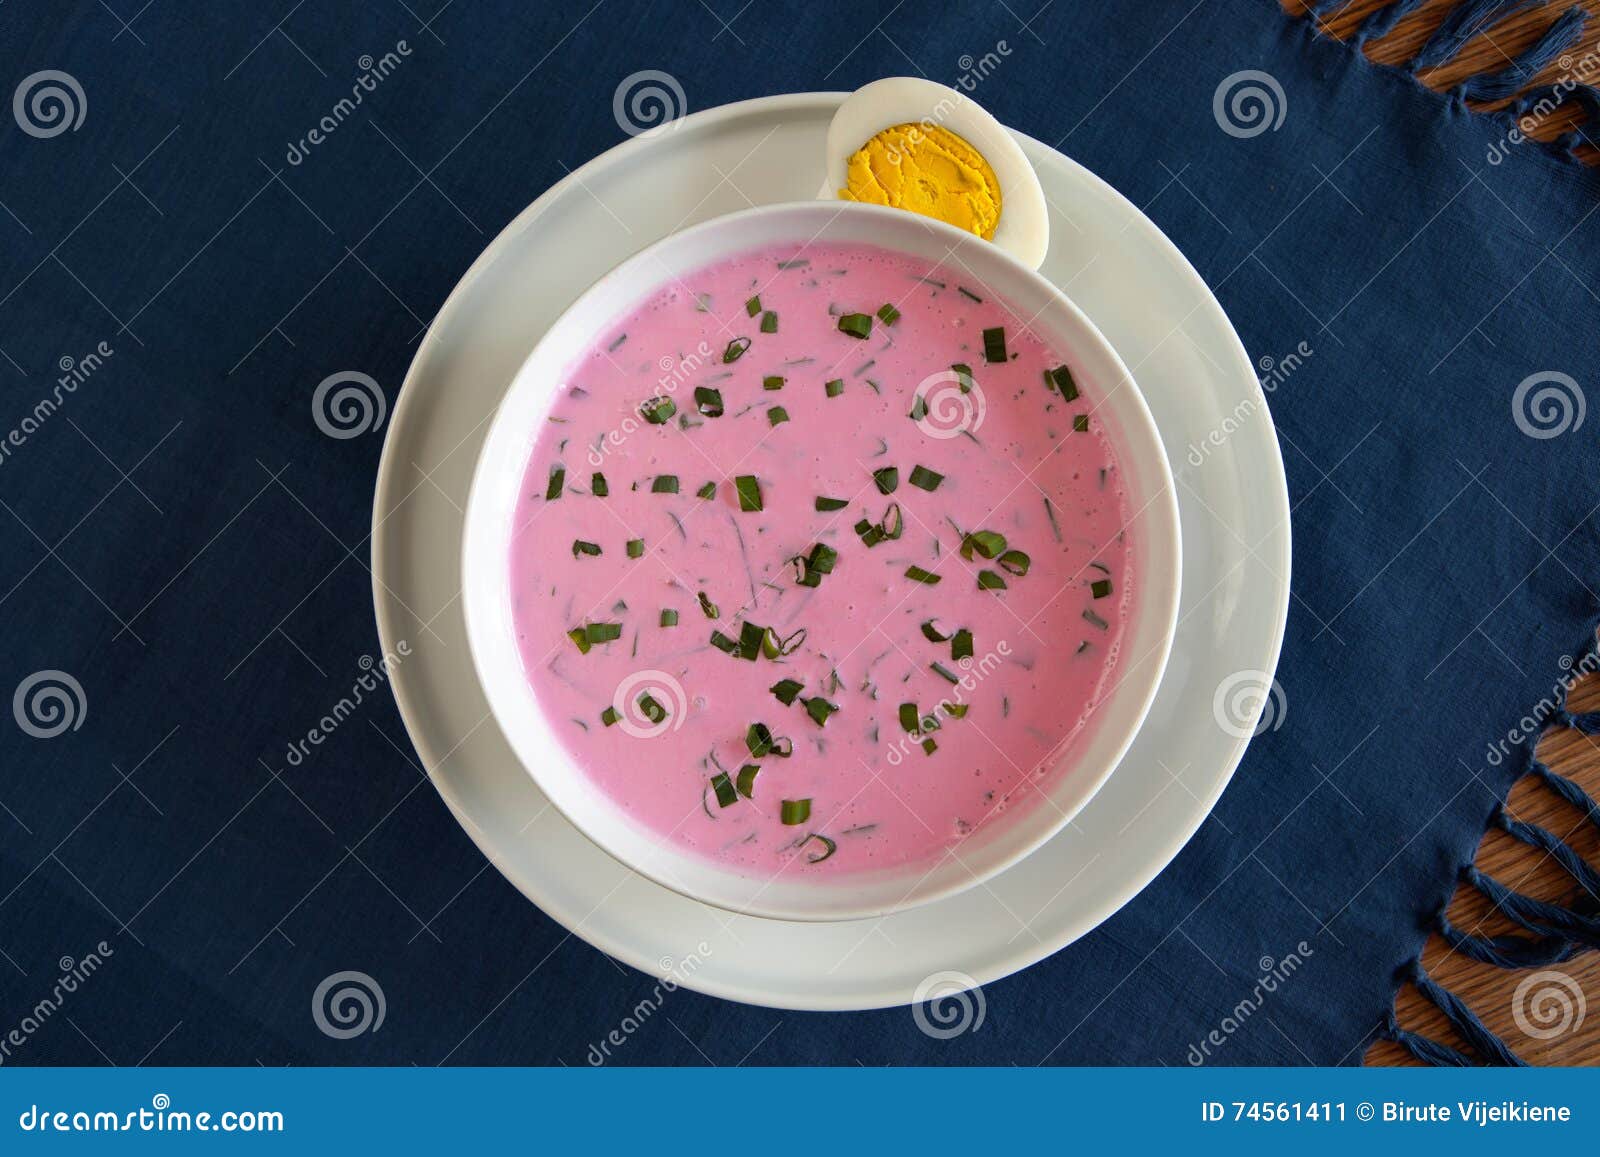 Cold Beet Soup, Traditional Lithuanian Cuisine Stock Image - Image of ...